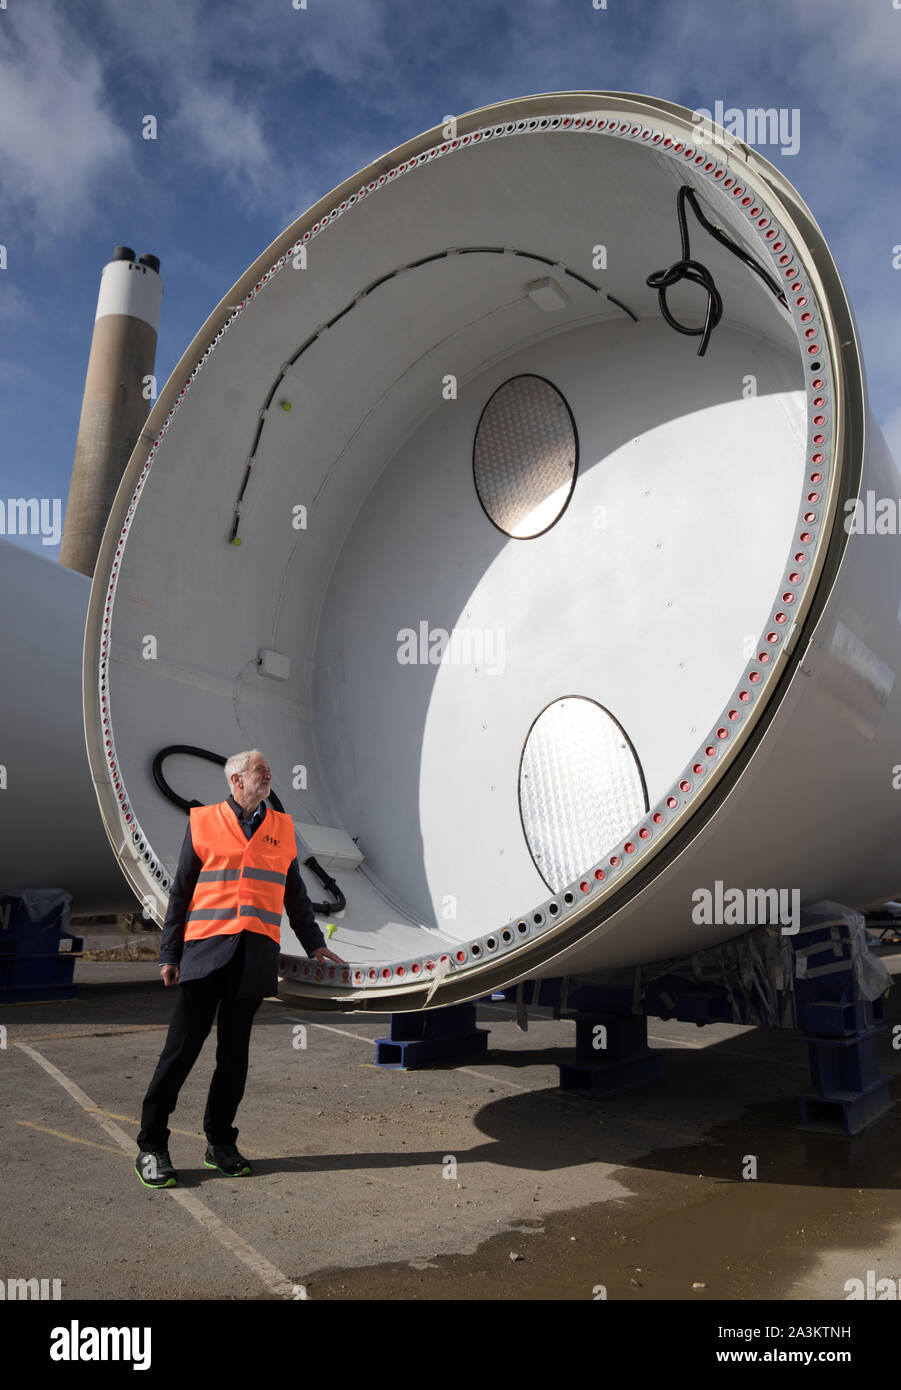 Labour Party leader Jeremy Corbyn inspects a blade during a visit to a wind turbine facility in Fawley, Southampton, to set out how Labour's investment in green energy will create jobs and benefit coastal communities. Stock Photo